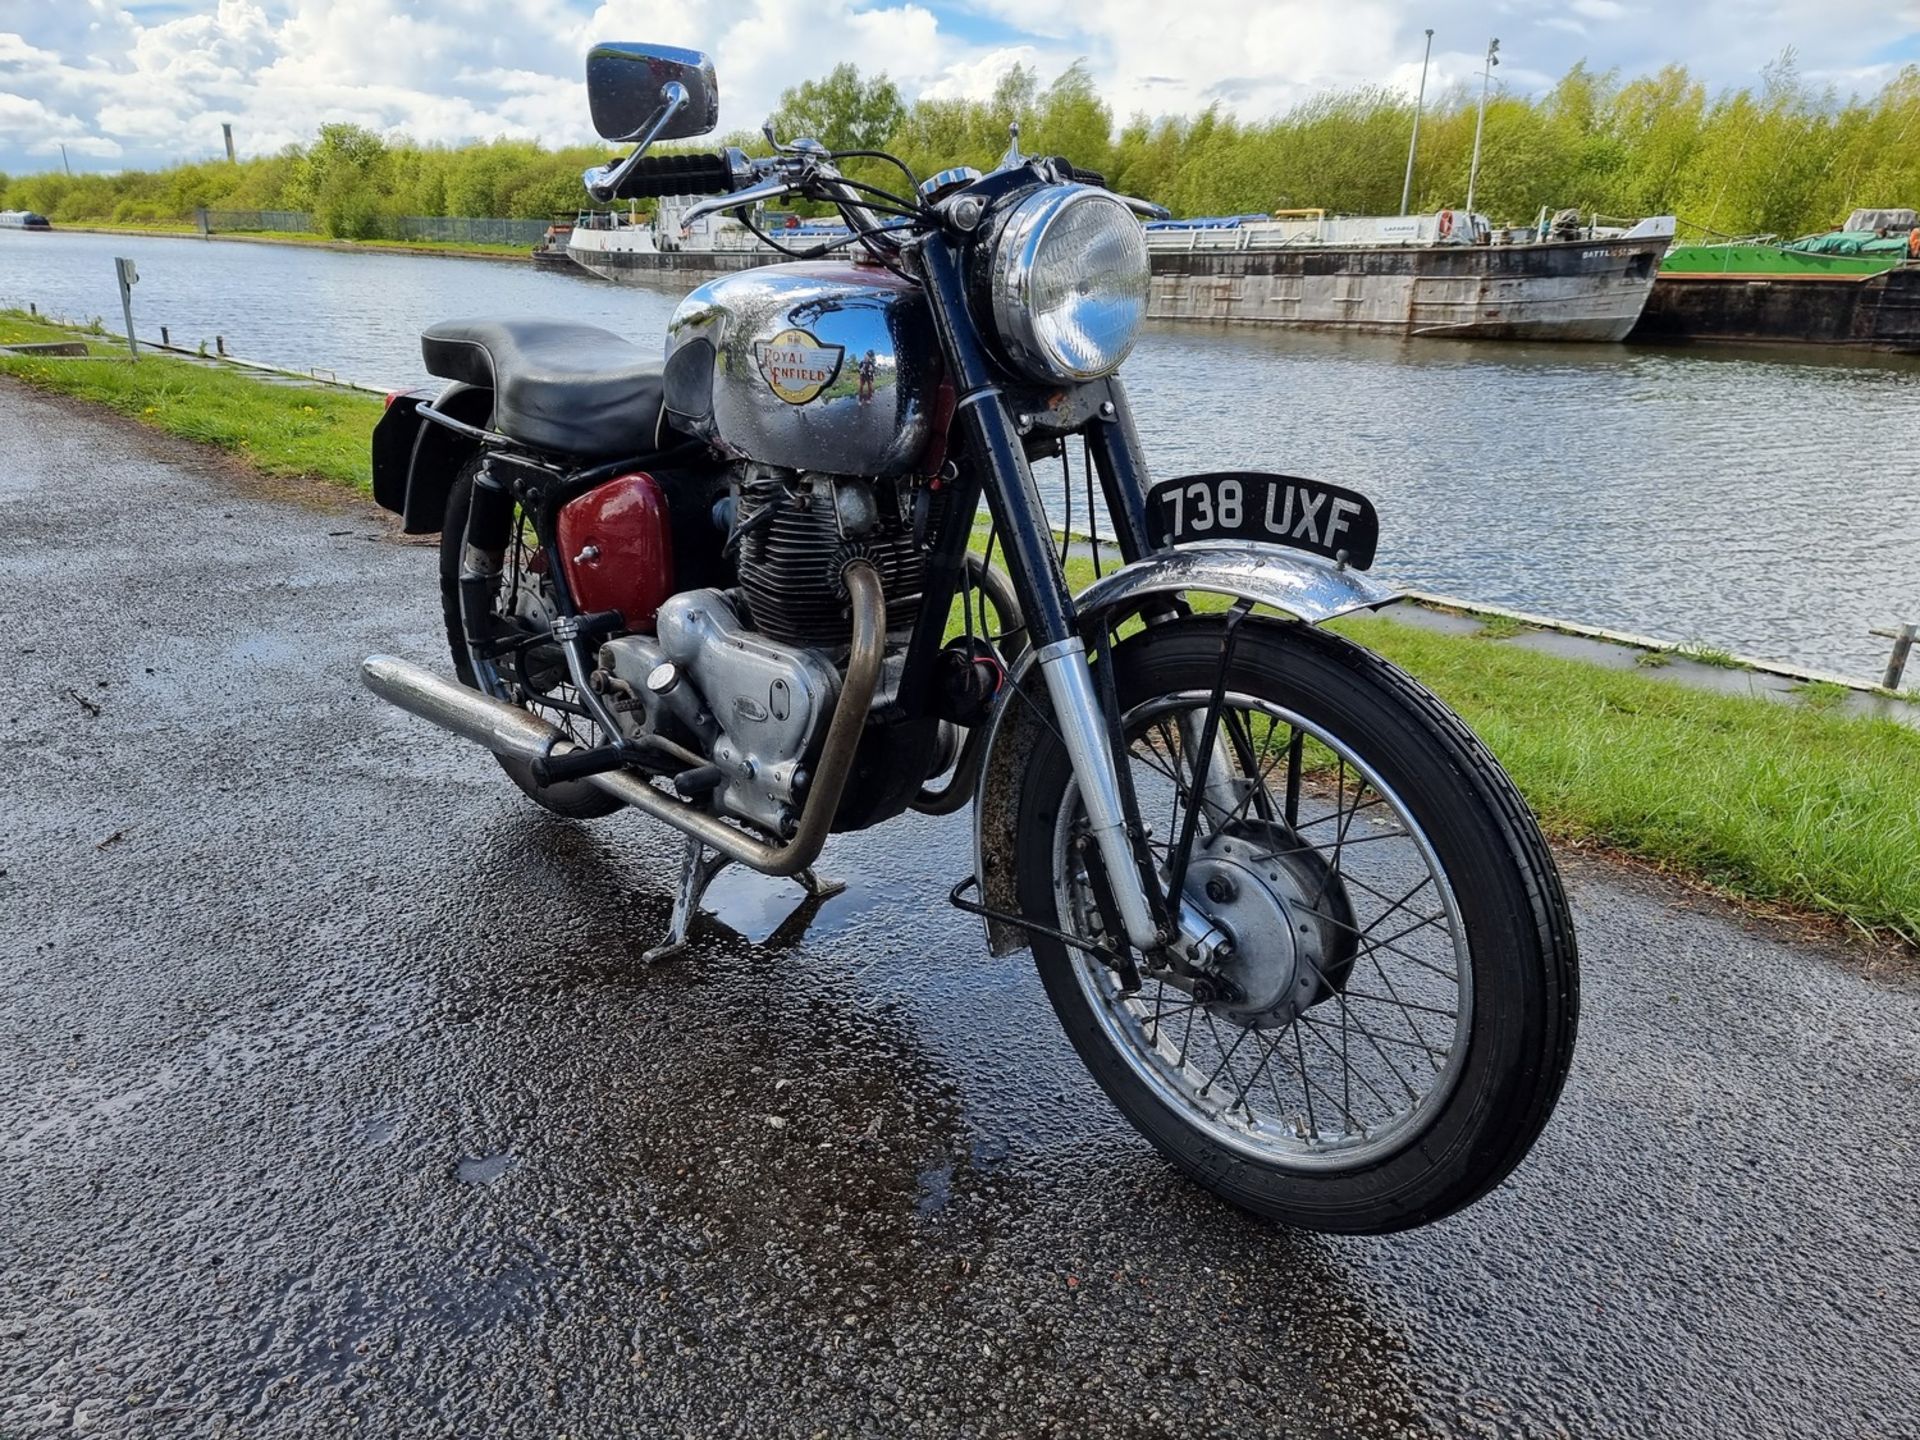 1958 Royal Enfield Constellation, 693 cc. Registration number 738 UXF (non transferrable). Frame - Image 15 of 16